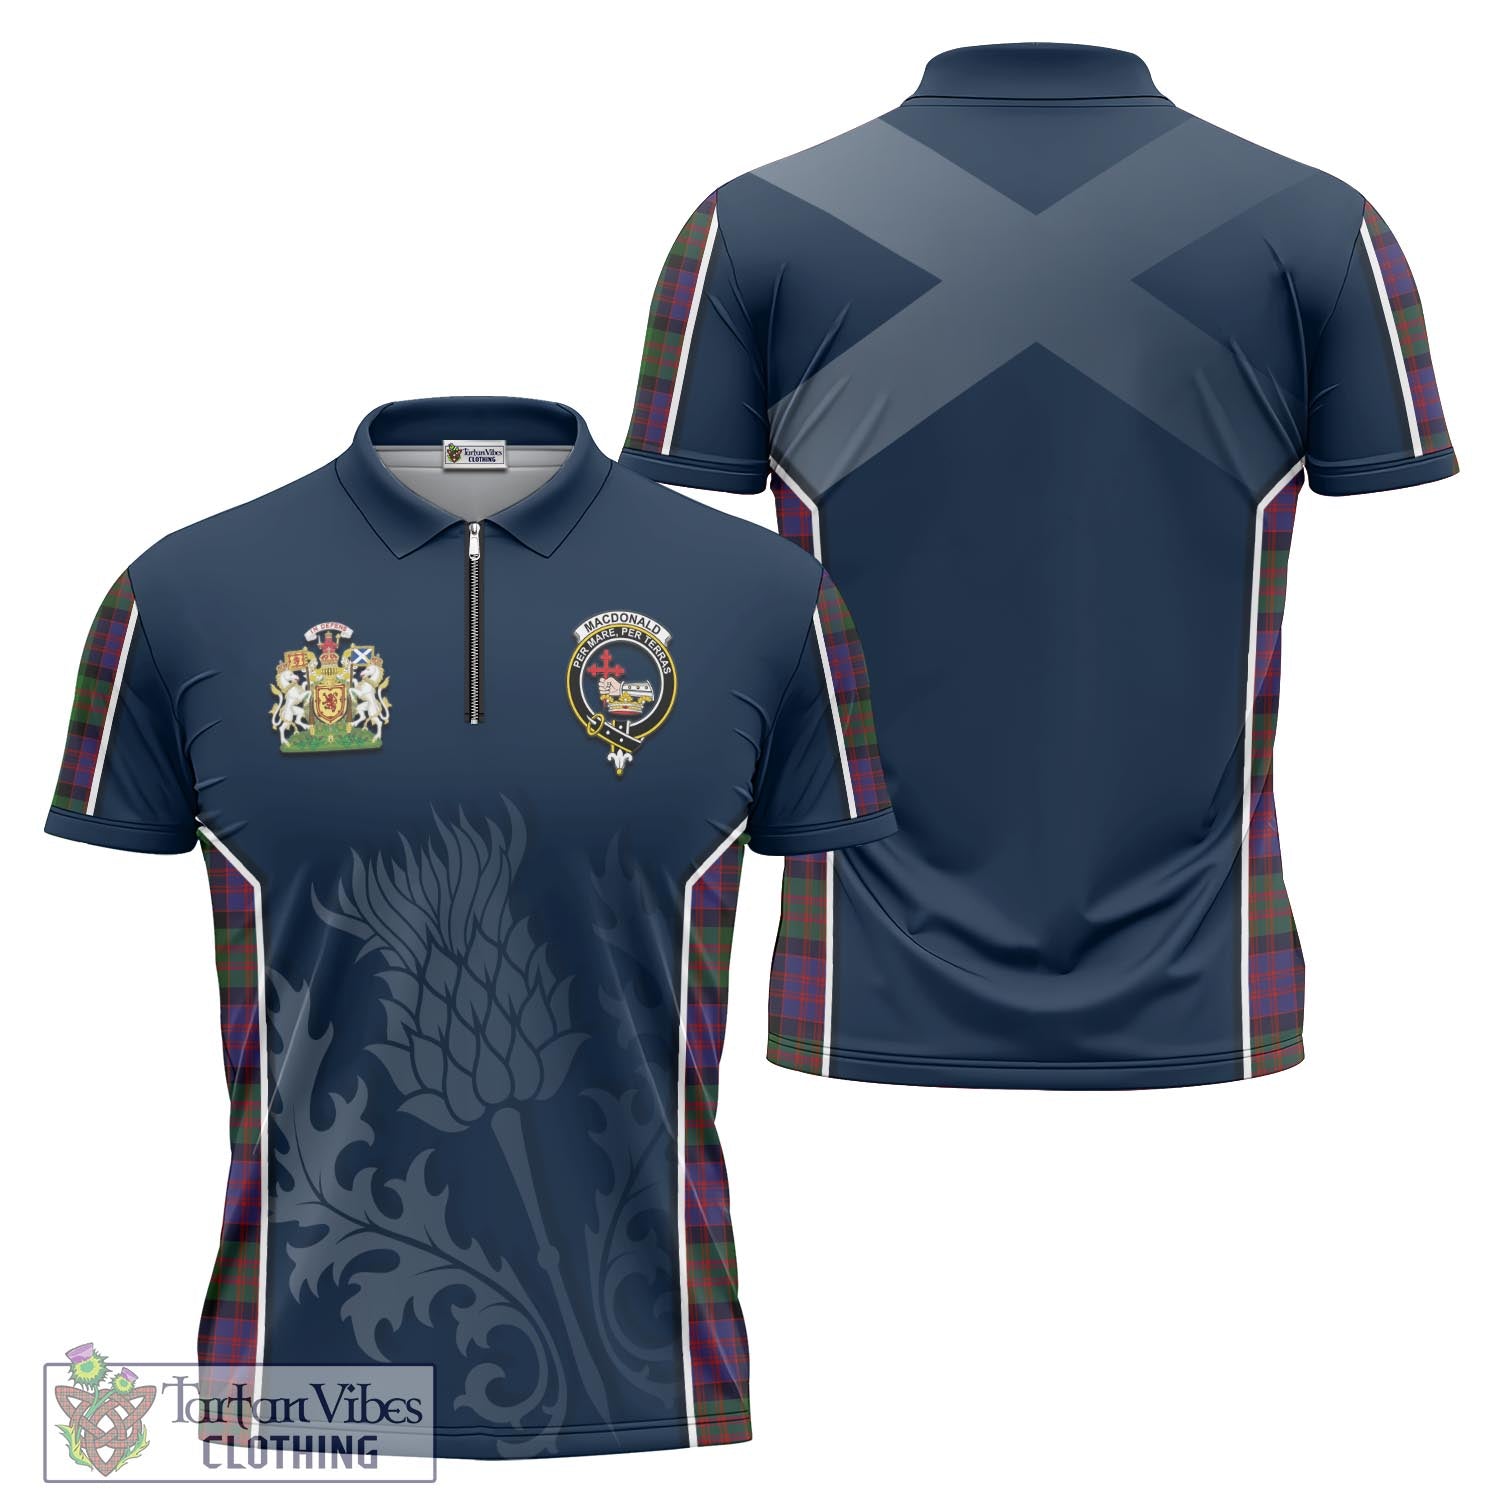 Tartan Vibes Clothing MacDonald Tartan Zipper Polo Shirt with Family Crest and Scottish Thistle Vibes Sport Style